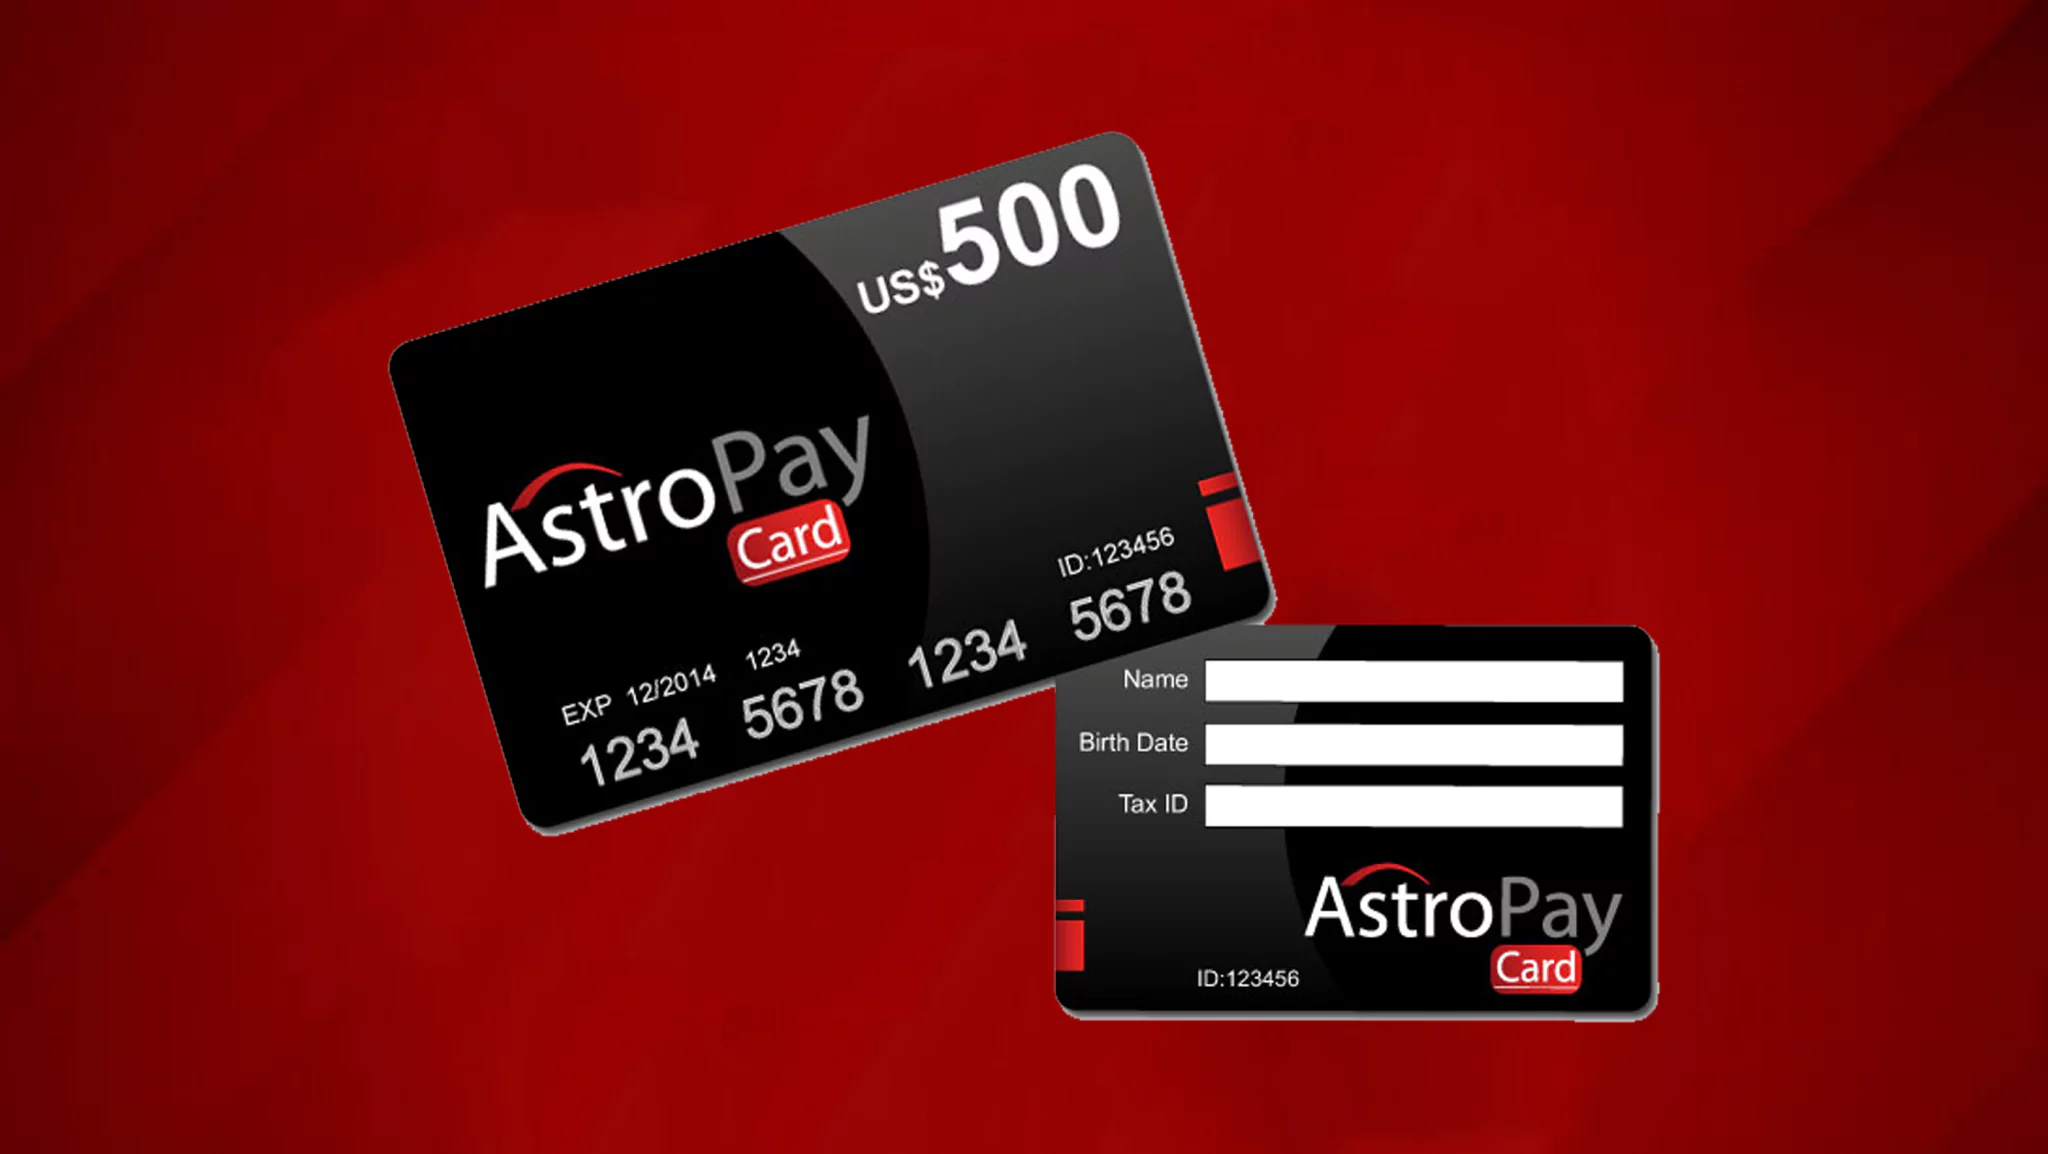 AstroPay Cards